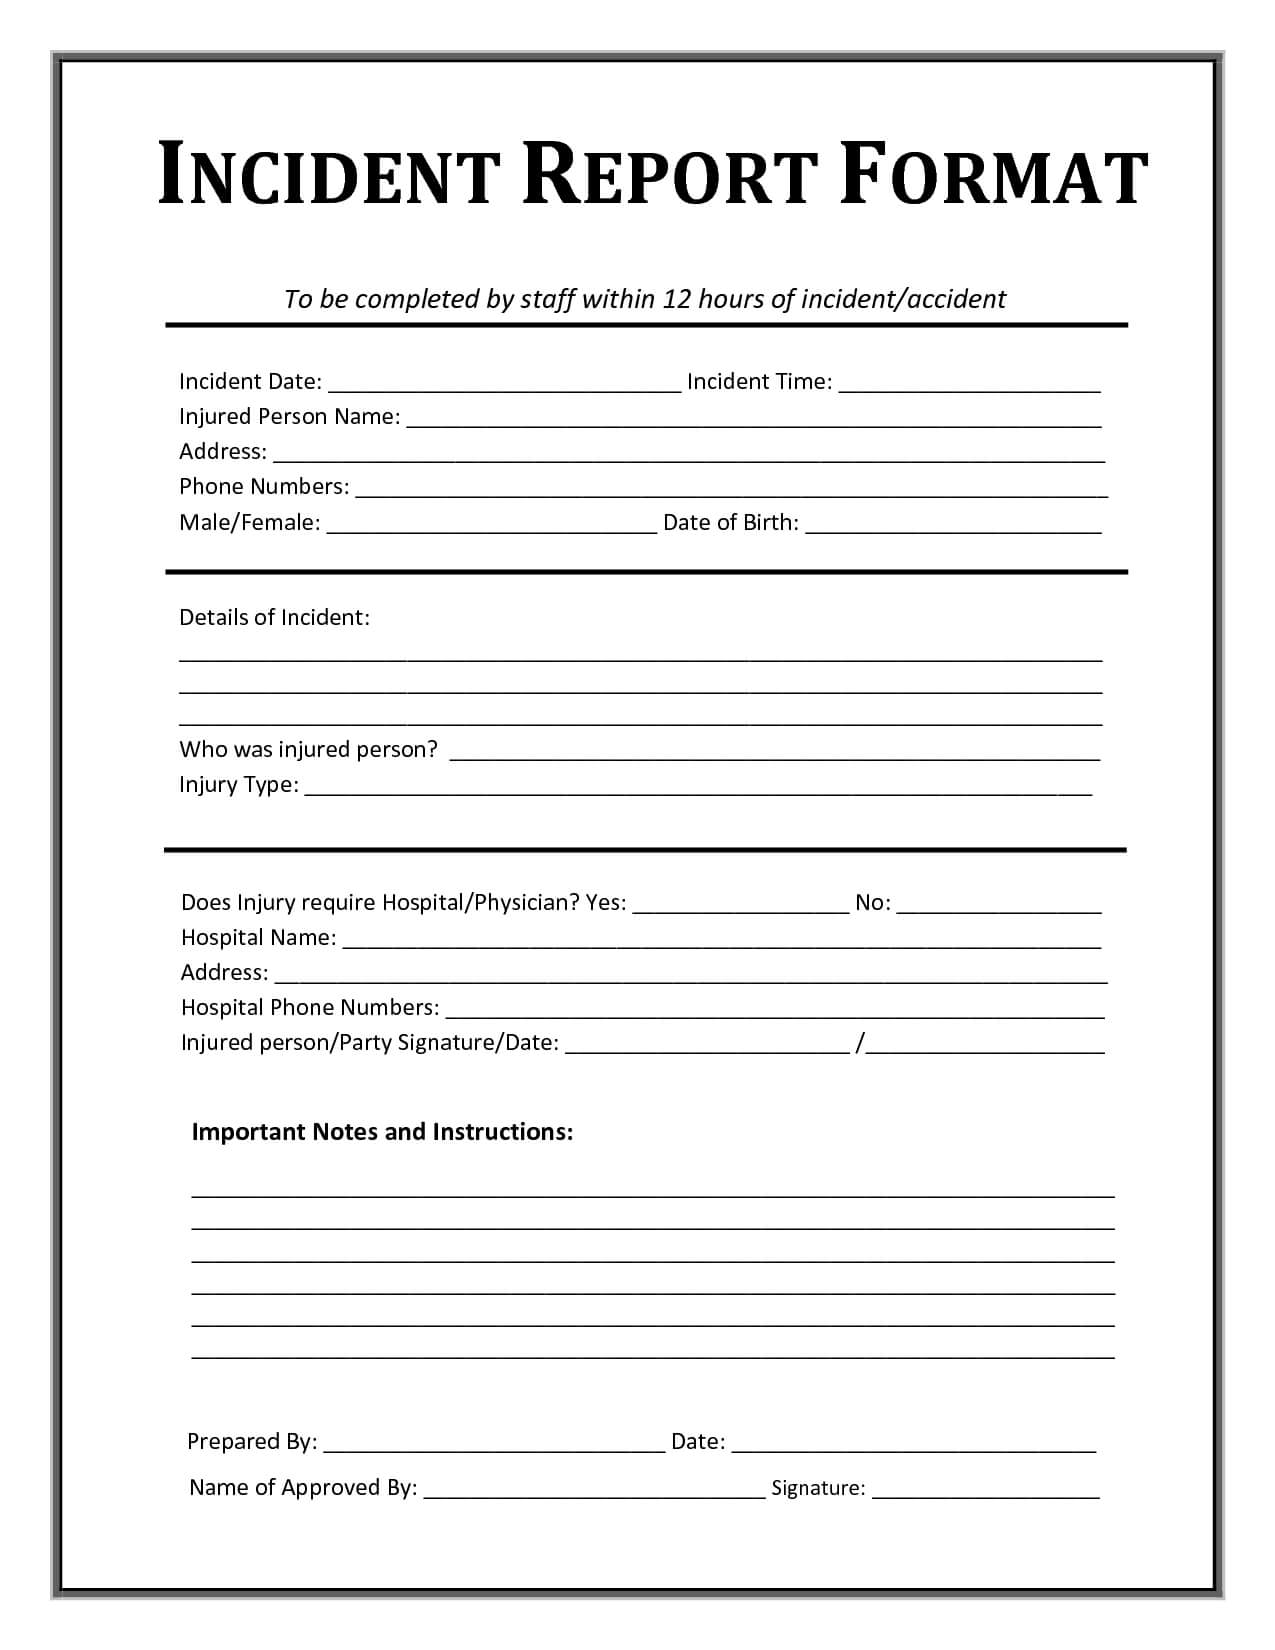 Incident Report Template | Incident Report Form, Incident In Incident Report Template Microsoft